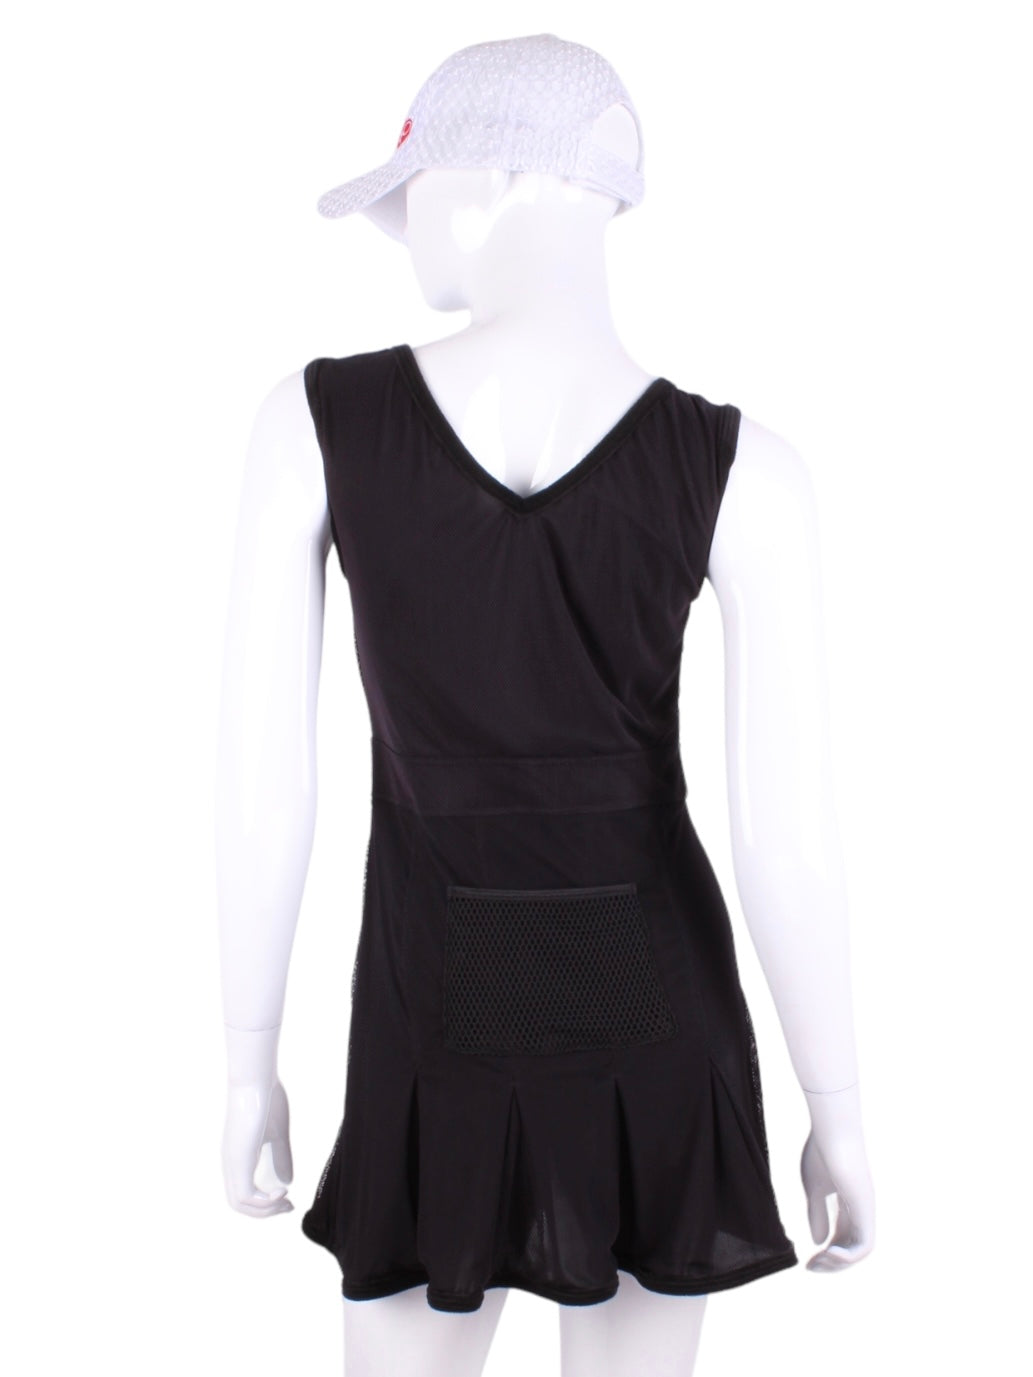 The Angelina Dress is from our sophisticated and elegant collections, for women with a flair for looking good. Our dress is fitted through the bodice, and flares out at the skirt. It is perfect for tennis, running and golf, and of course, a trip to your after-court party with your friends. It was designed for confident women like you! 